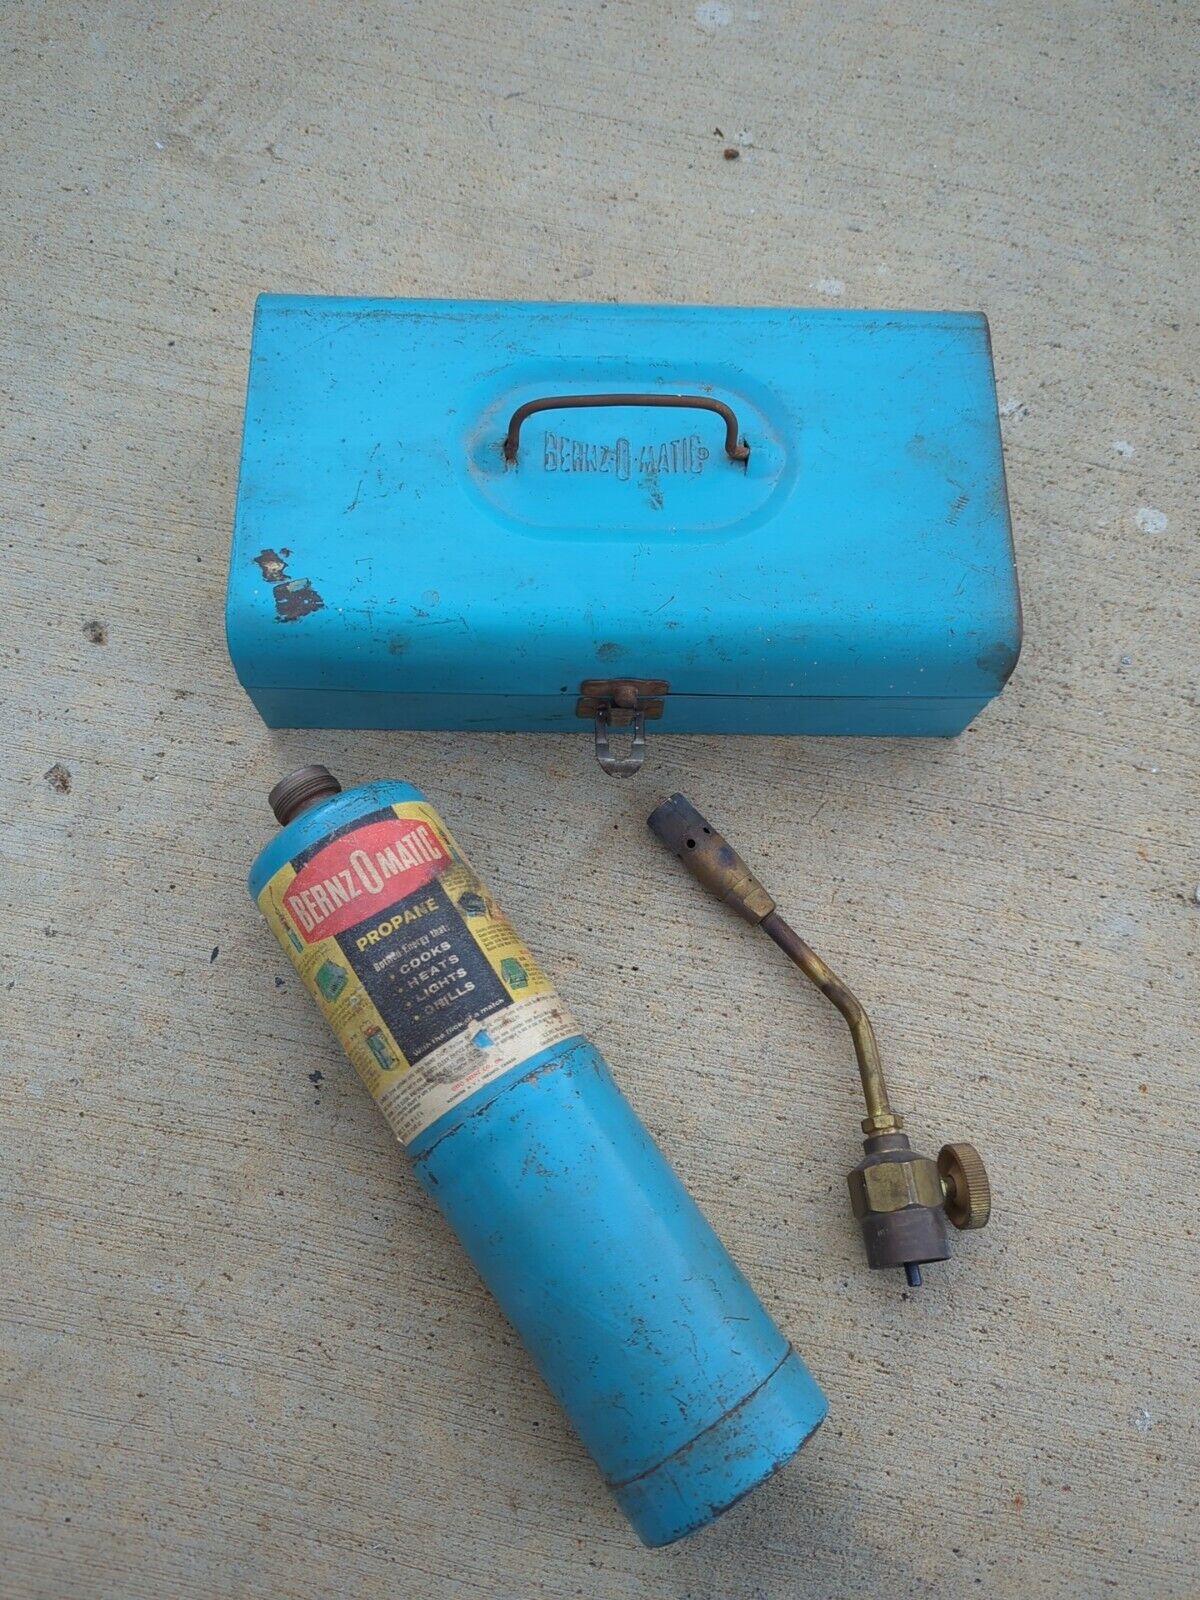 Vintage Bernz-O-Matic Torch With Toolbox And Tip Kit Otto Bernz